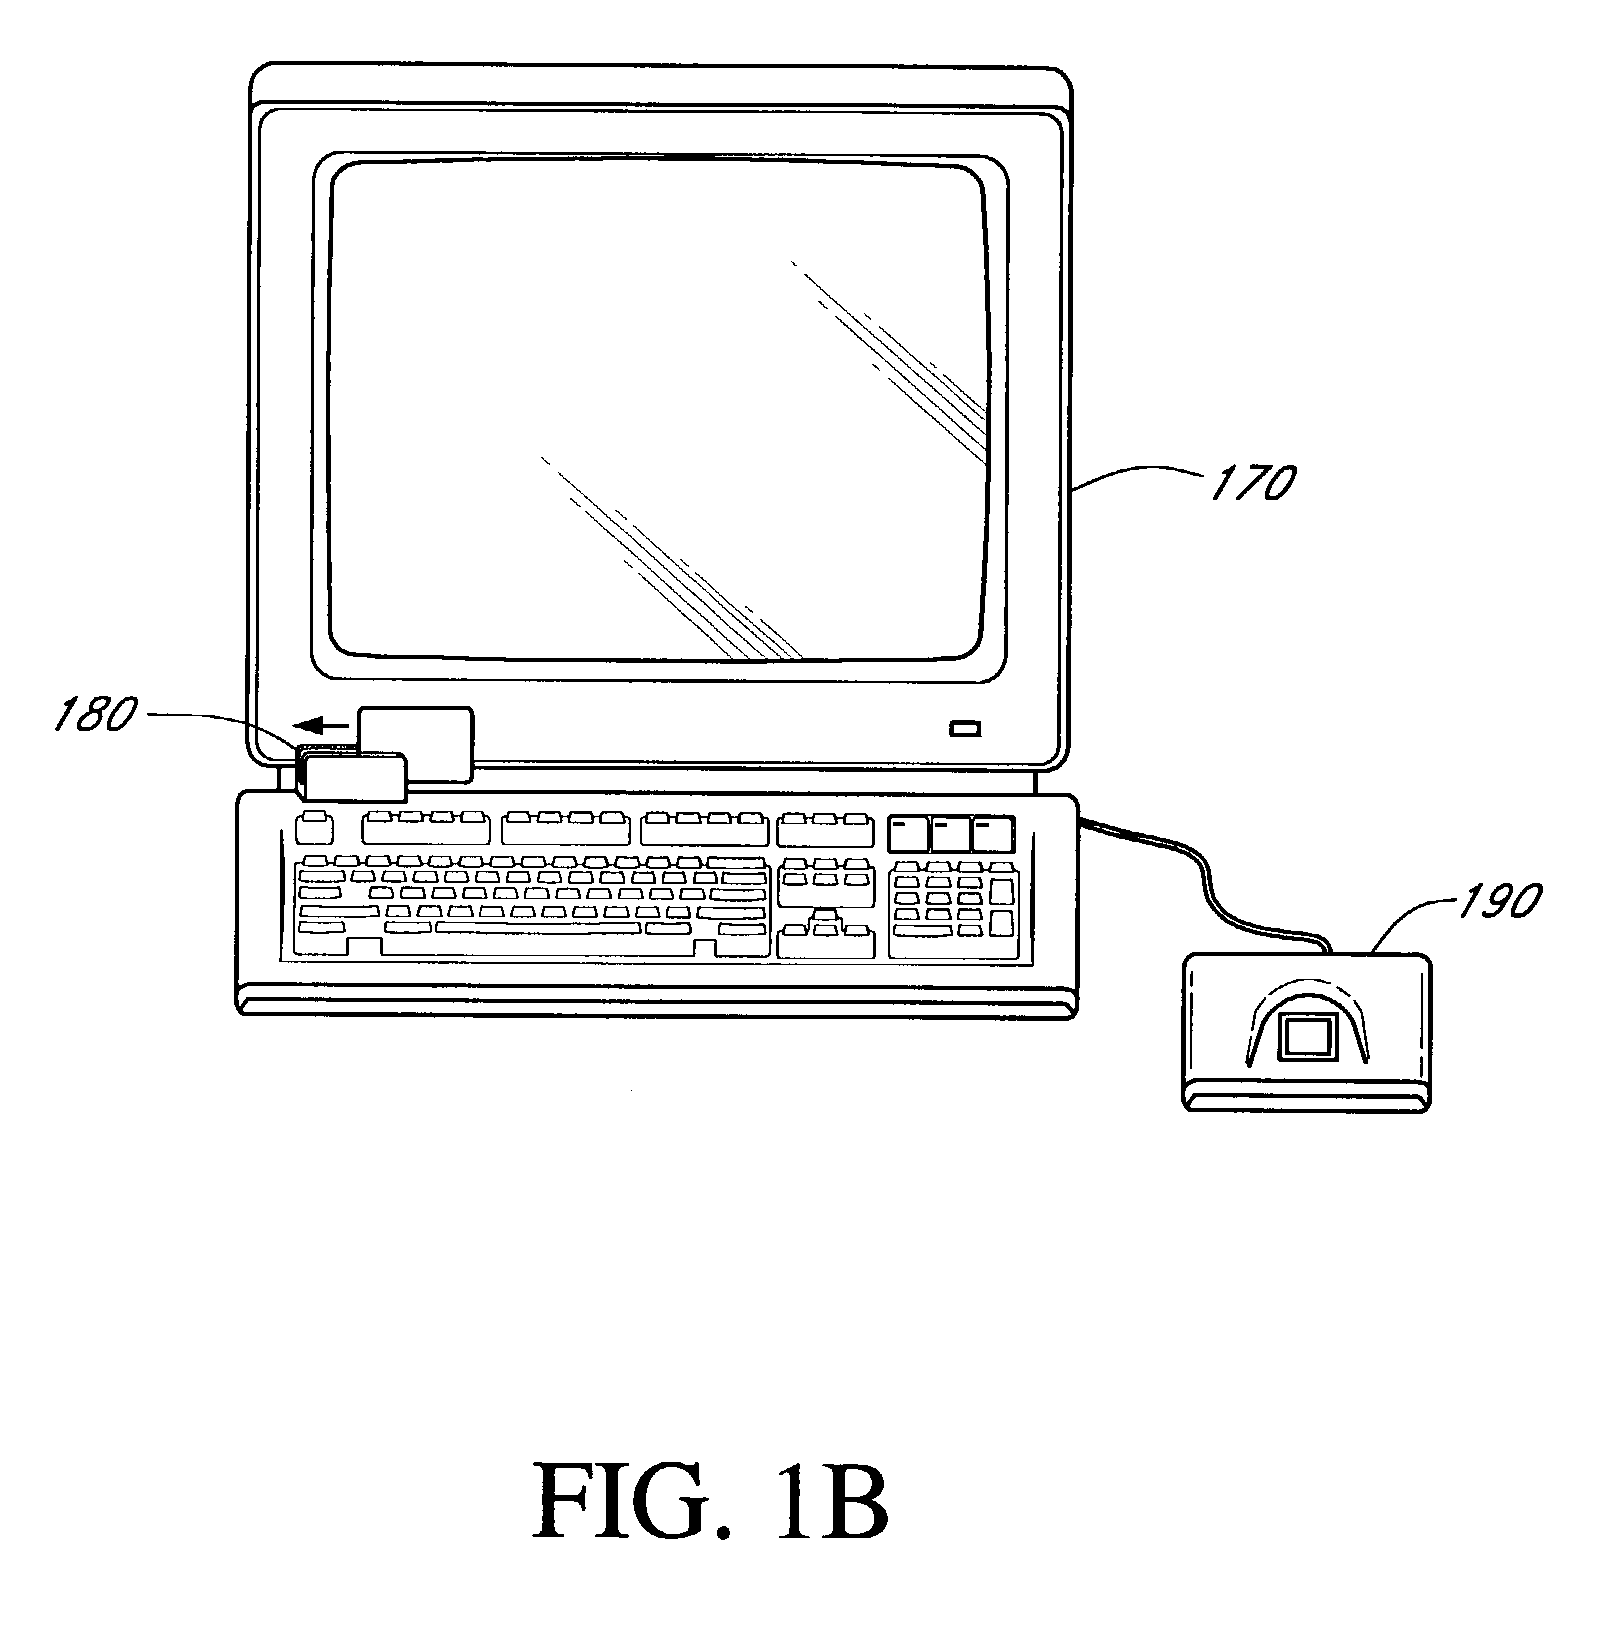 Systems and methods for determining a need for authorization